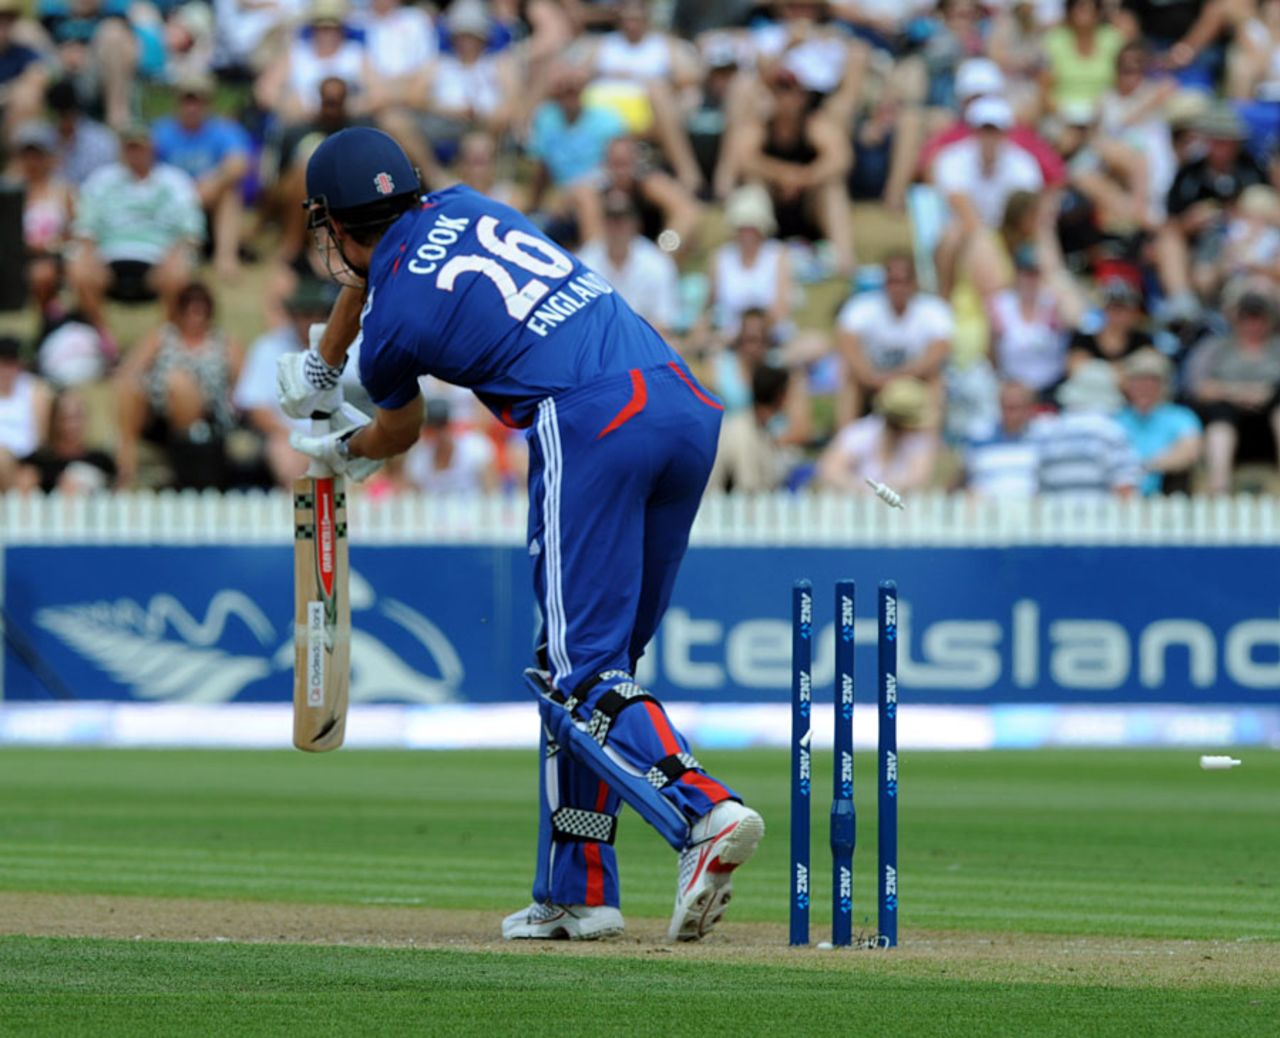 Alastair Cook was bowled for 4, New Zealand v England, 1st ODI, Hamilton, February 17, 2013